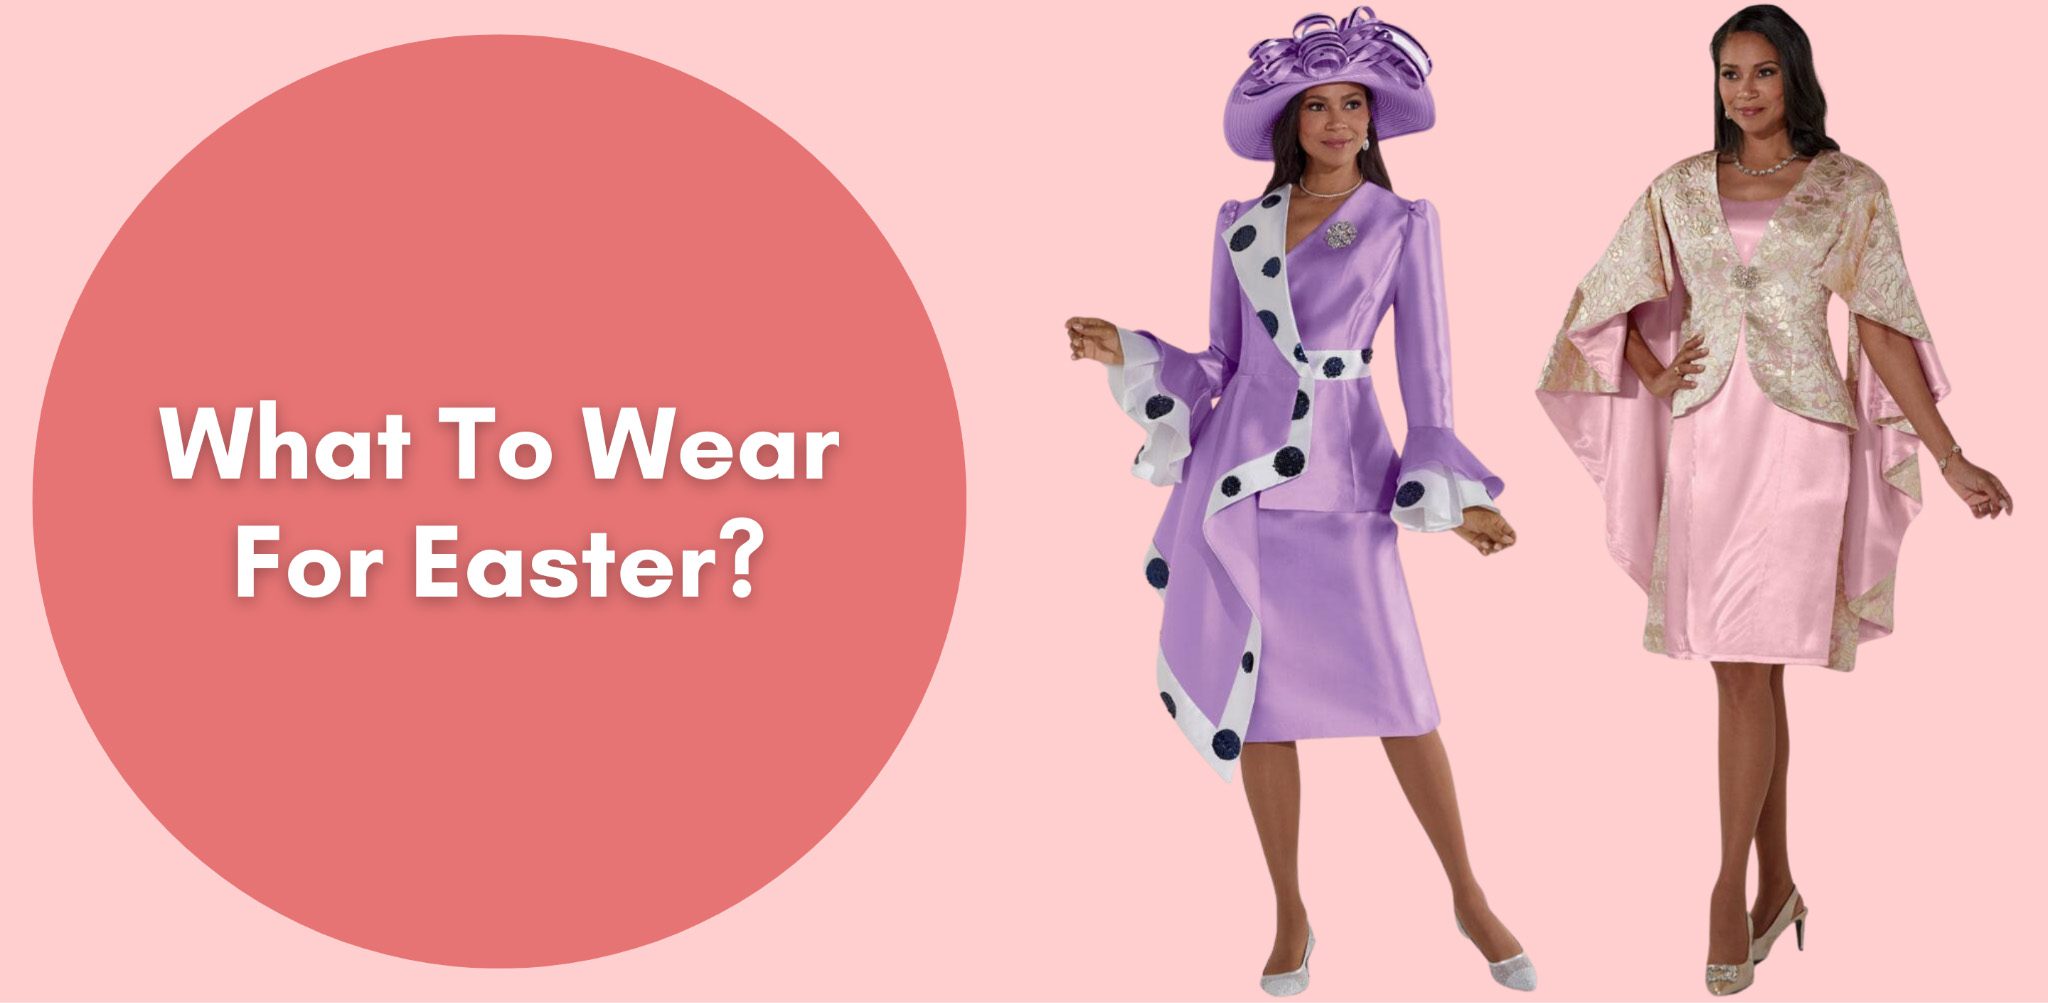 What To Wear For Easter?